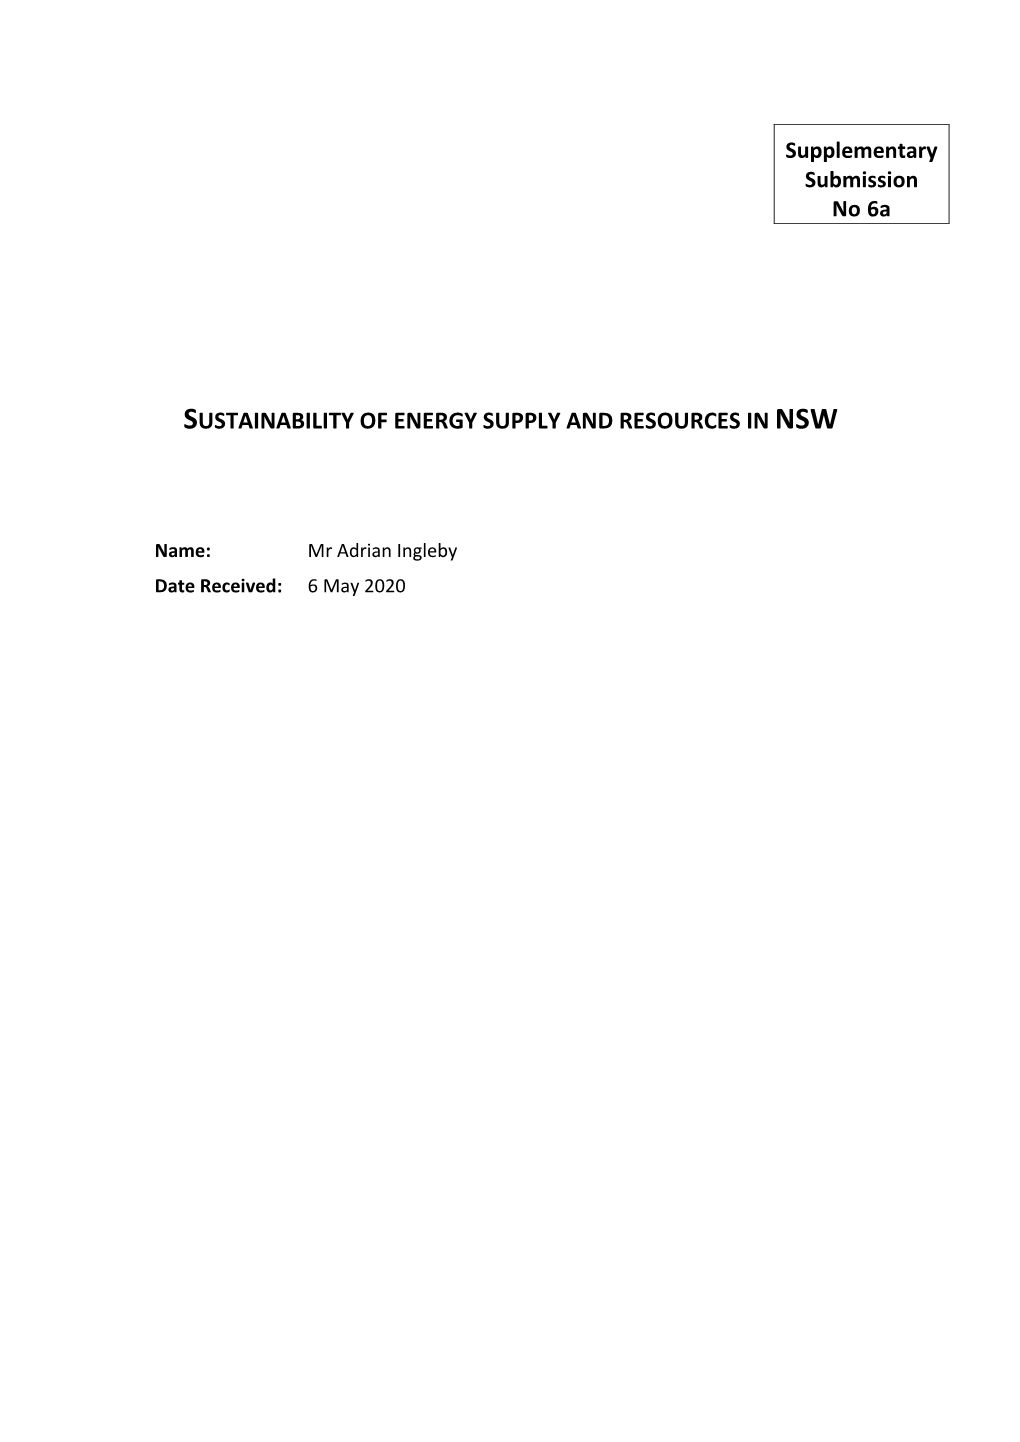 Supplementary Submission No 6A SUSTAINABILITY of ENERGY SUPPLY and RESOURCES IN